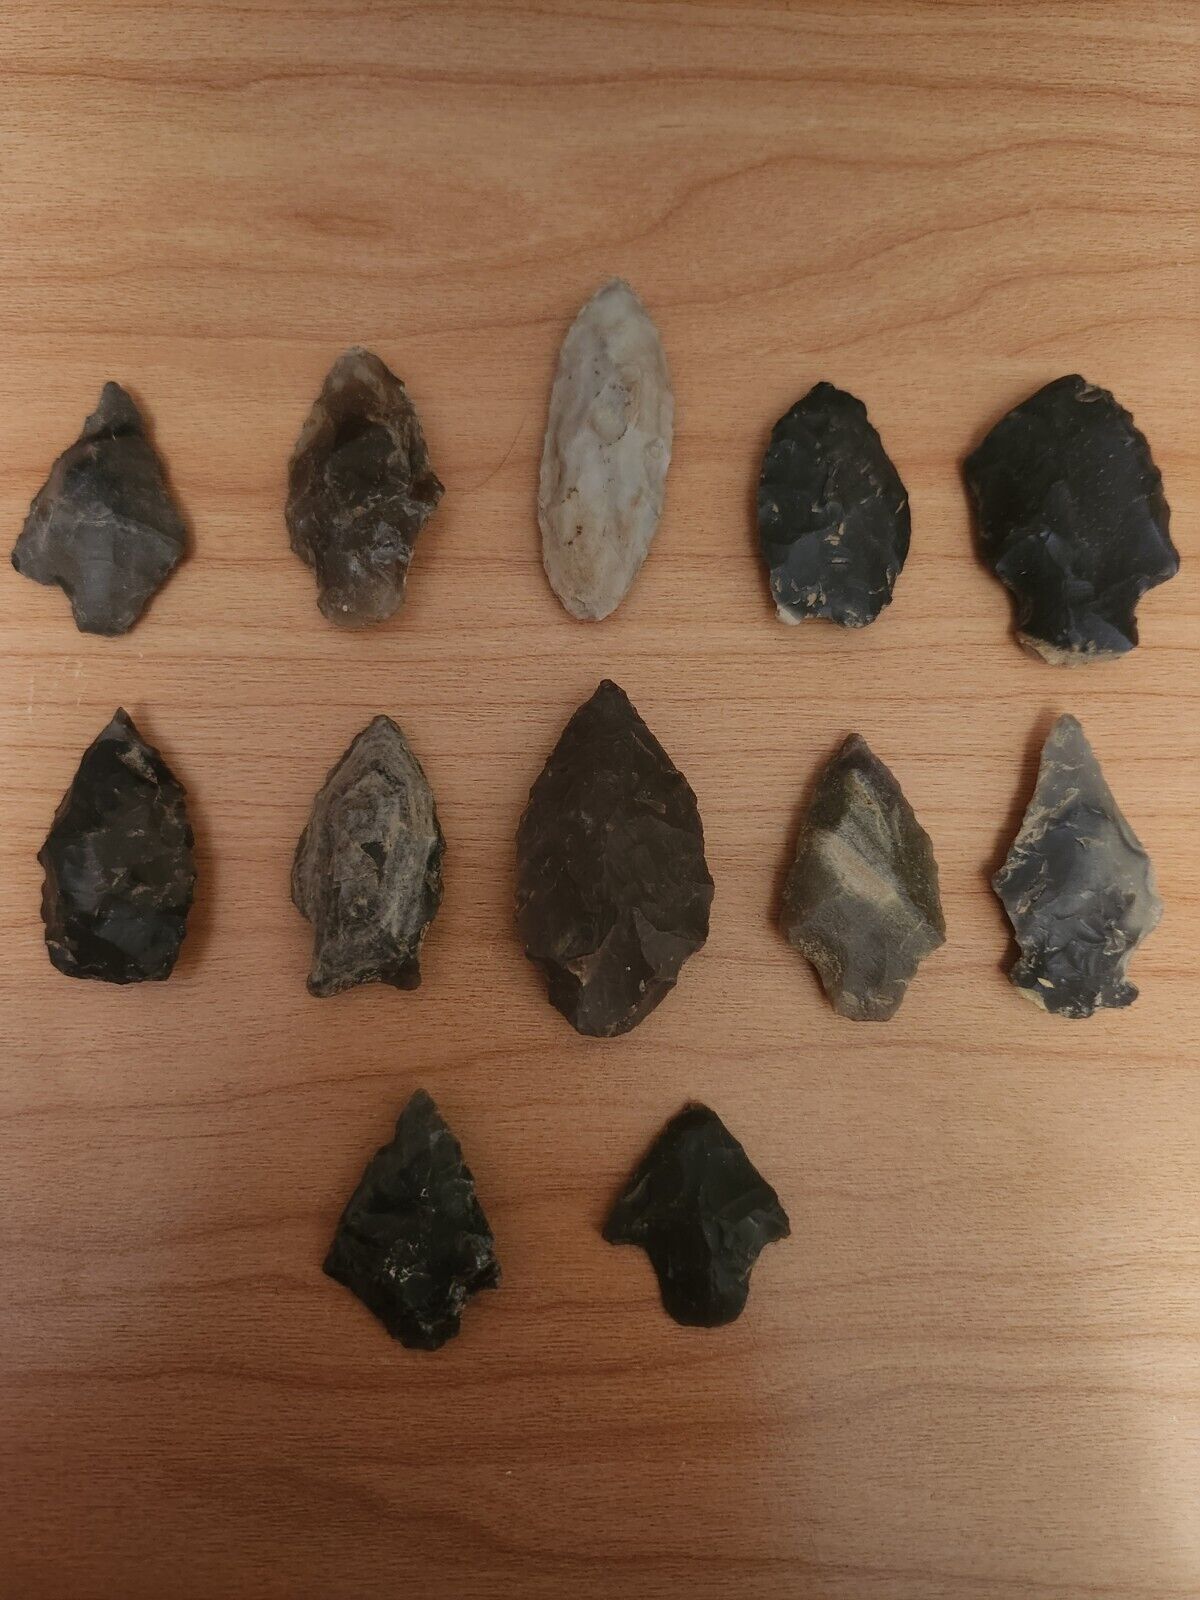 Authentic Arrowheads 12 Ohio River Native American Artifacts Lot Group